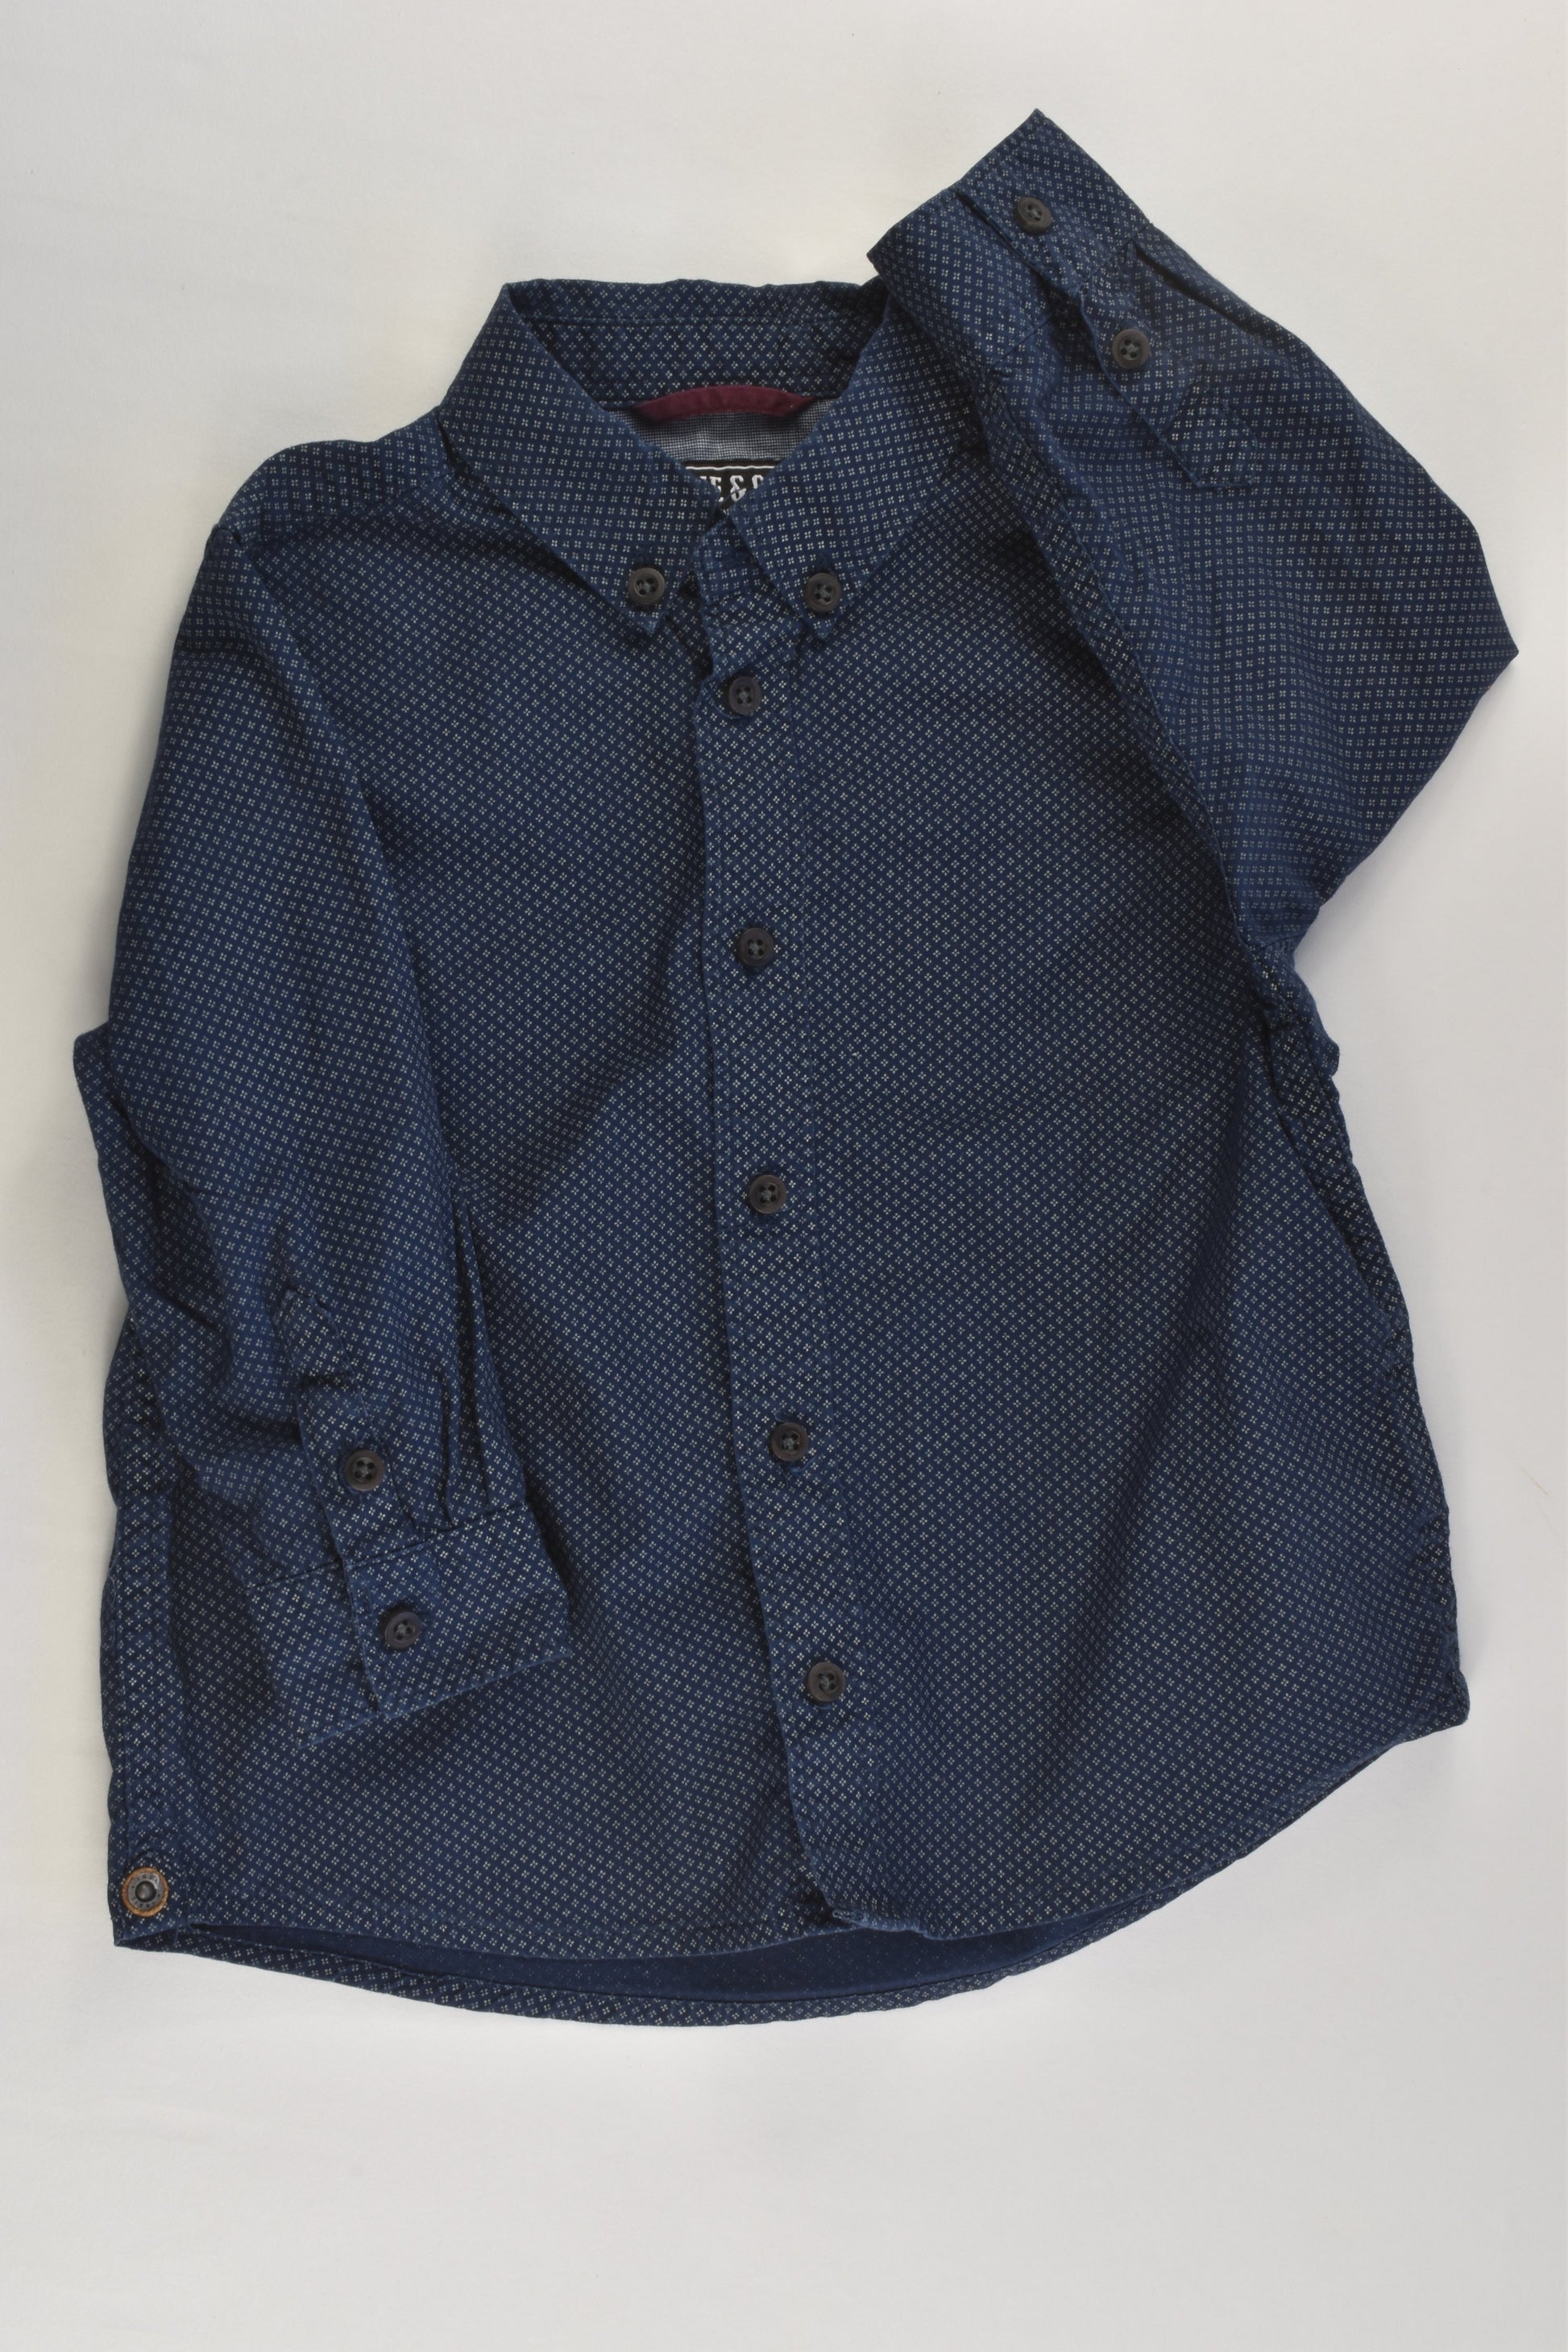 Indie & Co Size 1Collared Shirt